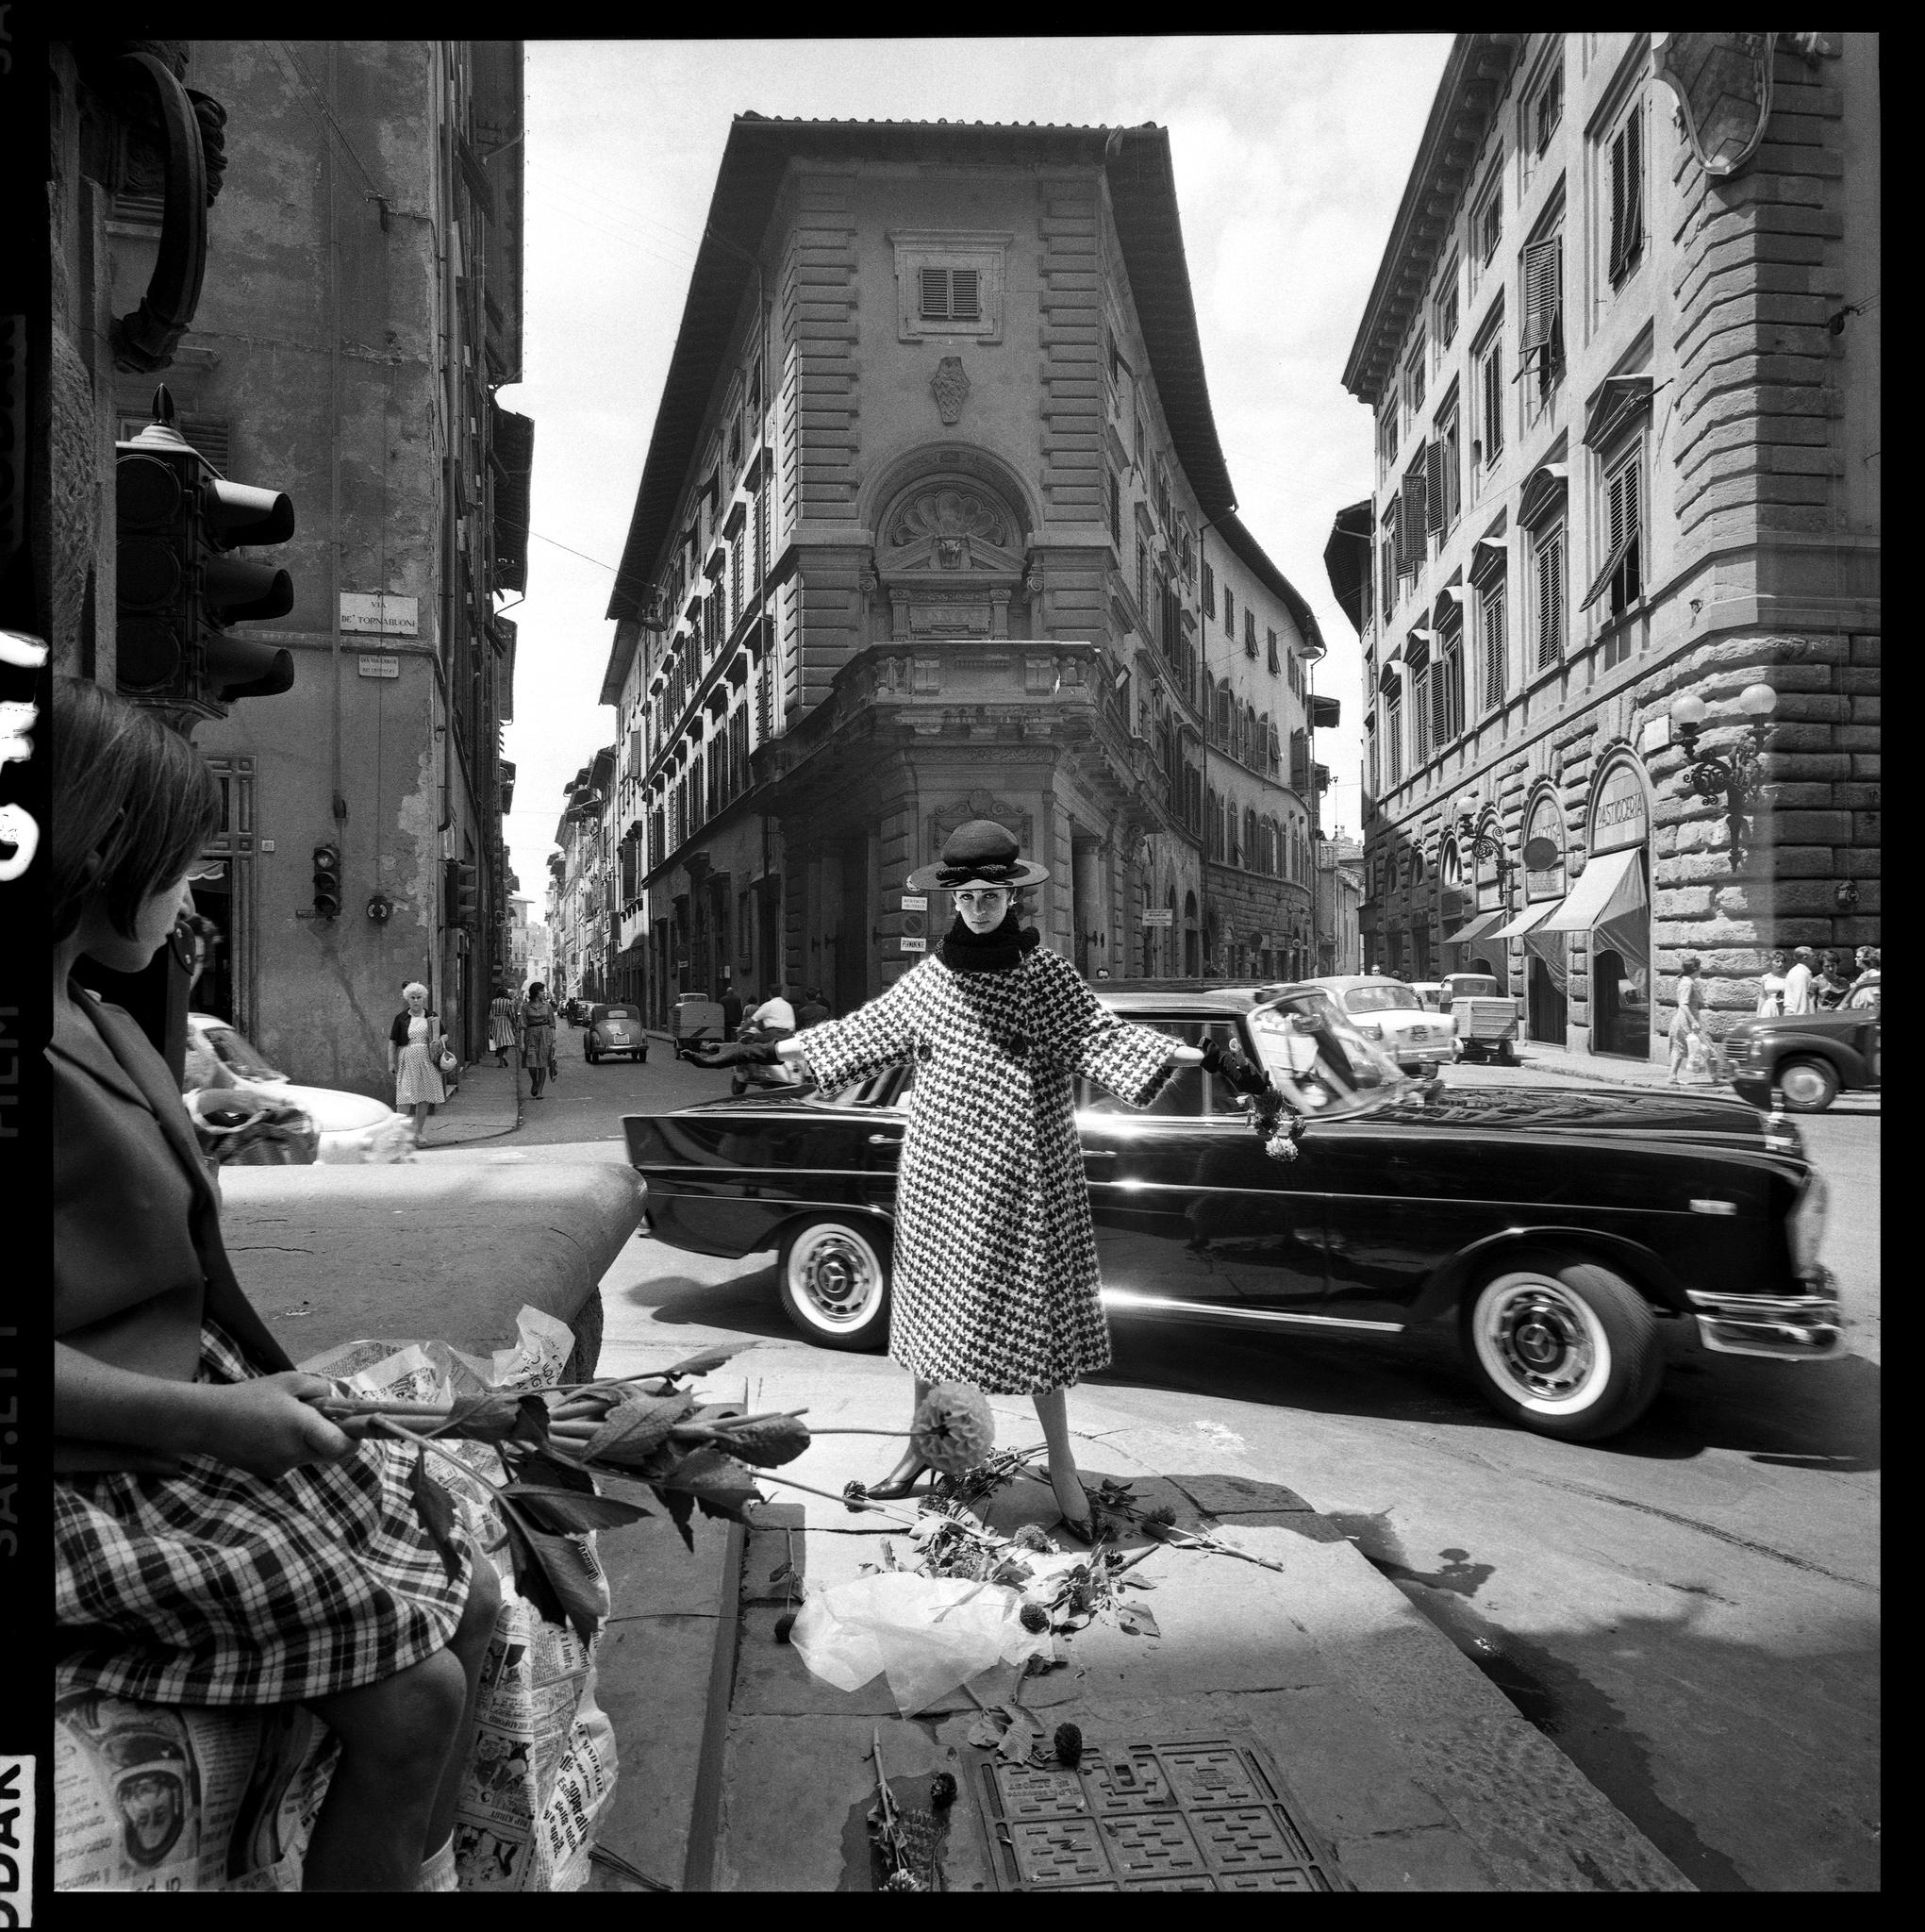 Fashion for ‘Vogue’, Florence, 1964 - Brian Duffy (Black and White Photography)
Signed and embossed with archive stamp
Archive ink stamped and numbered on reverse
Modern silver gelatin print
18 x 18 inches
From an edition of 25

Available in